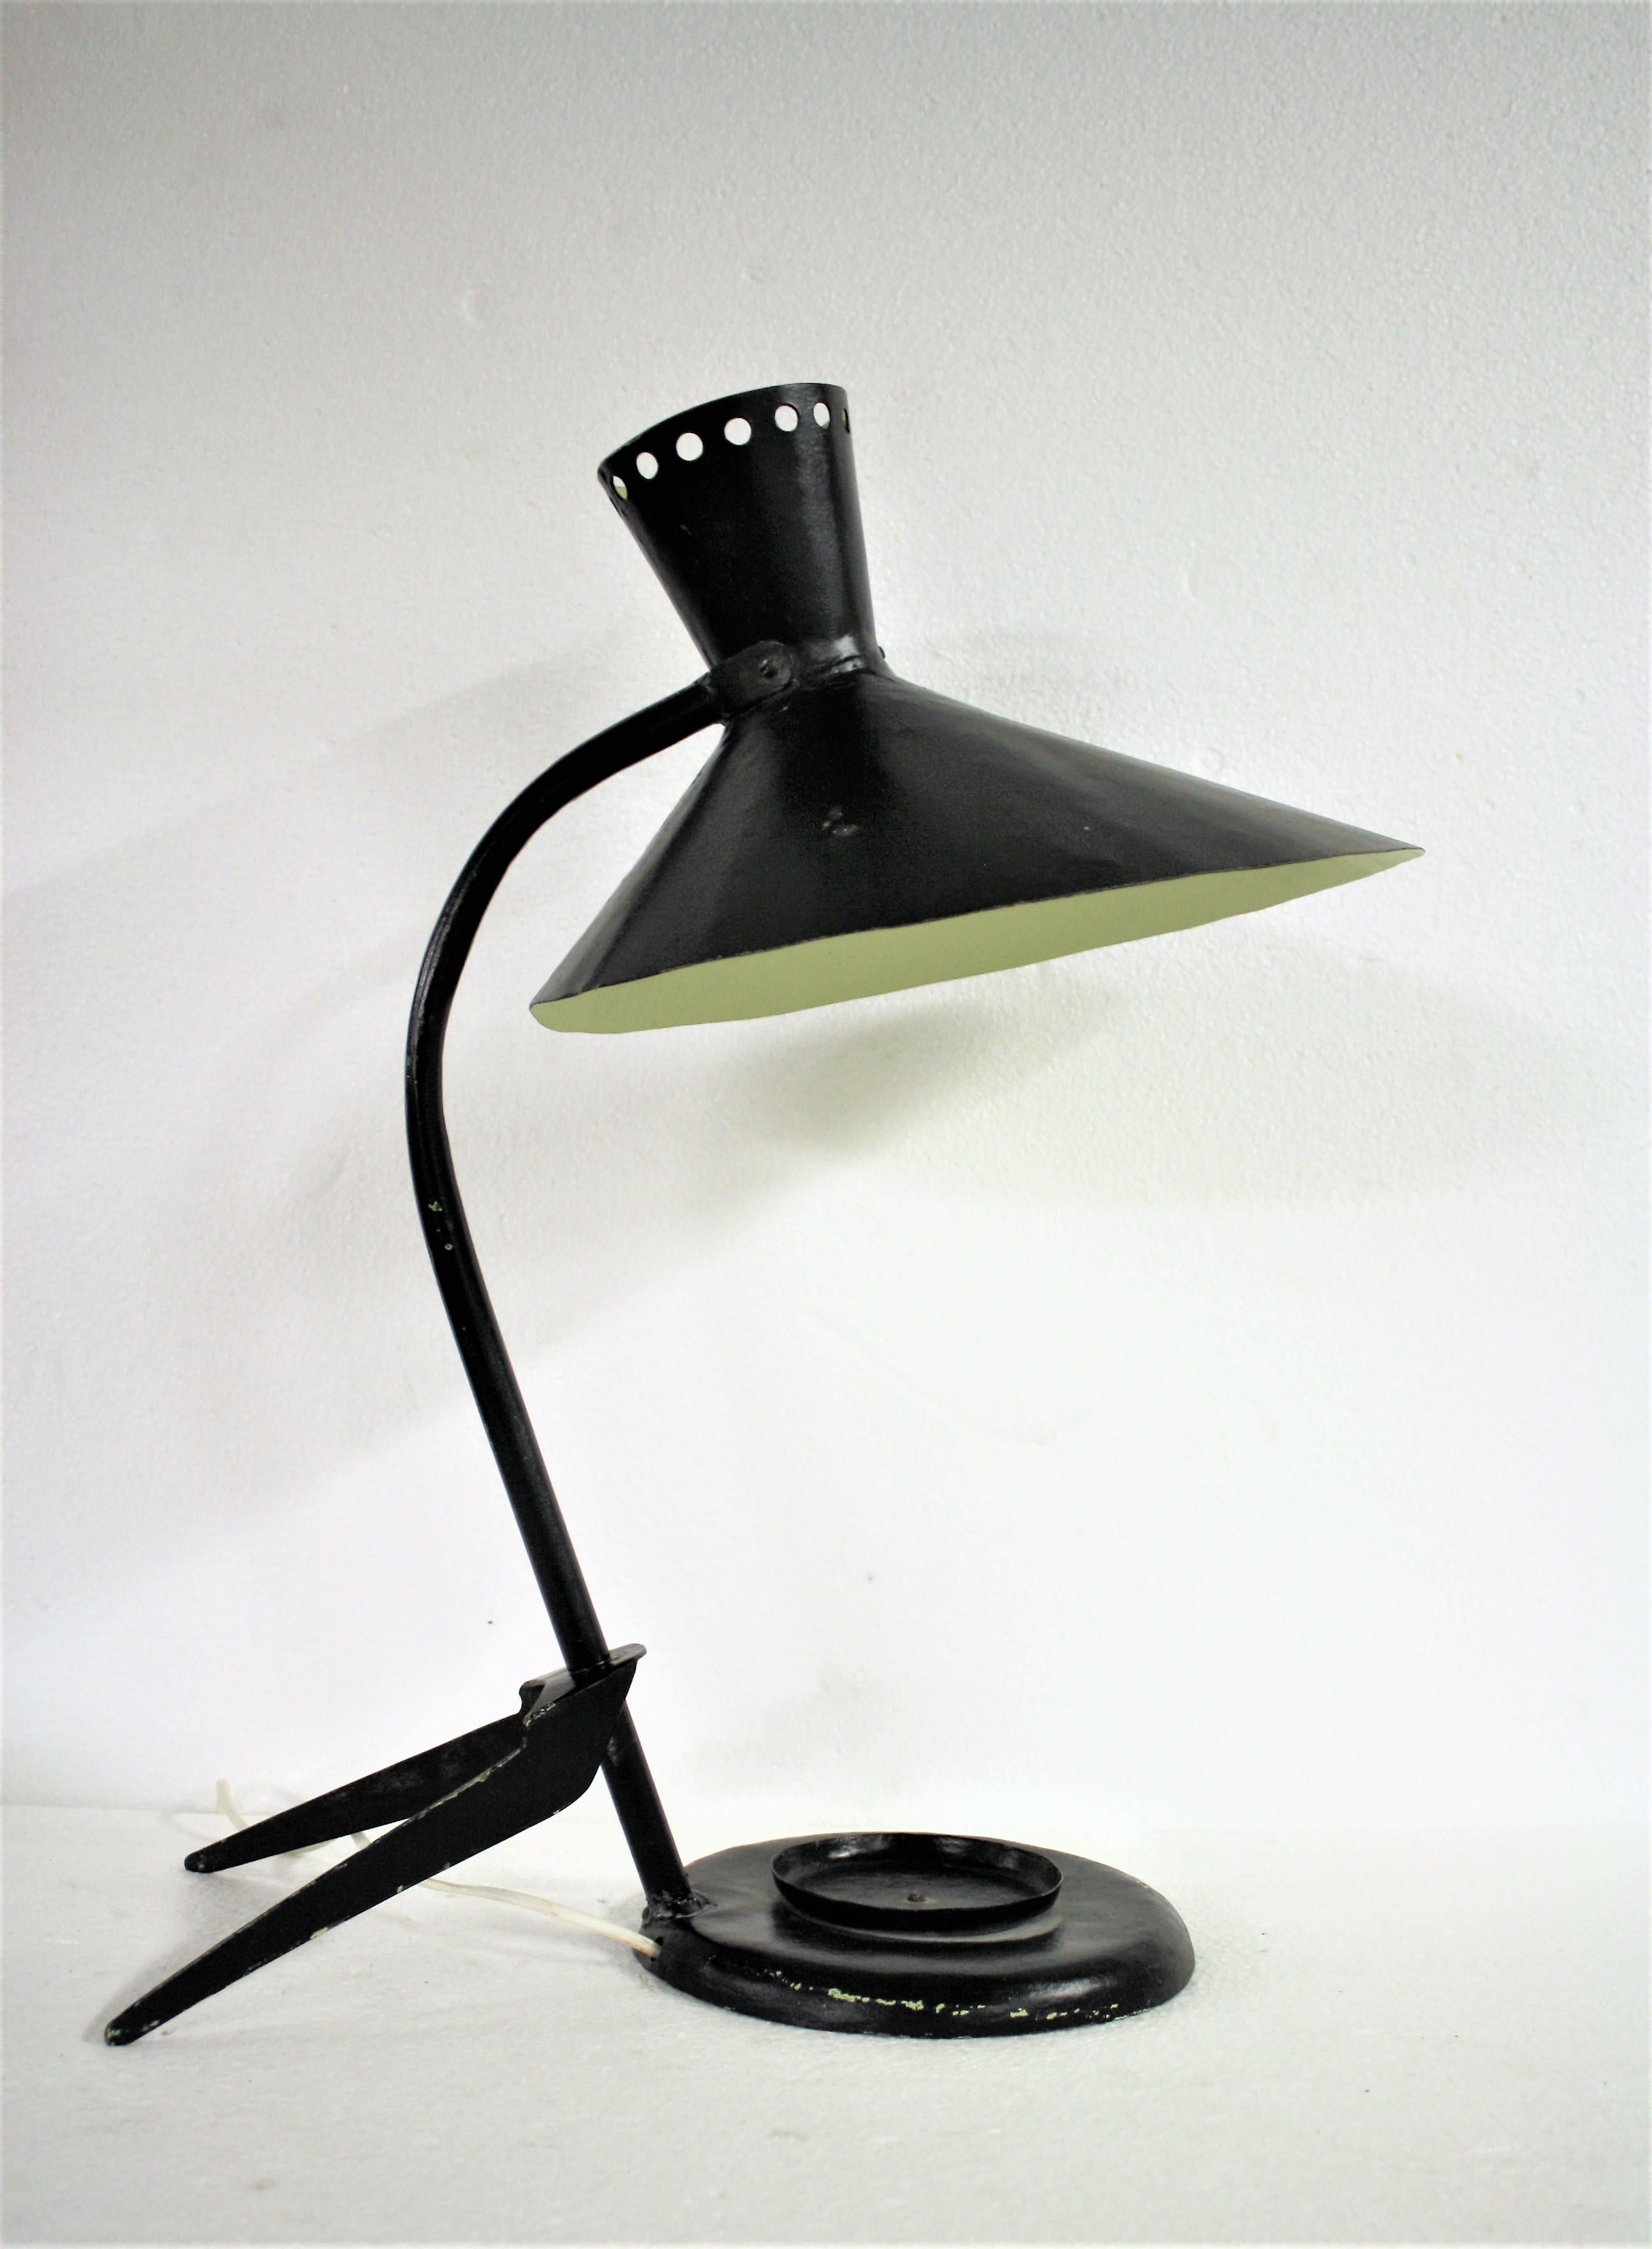 Huge Mid-Century Modern desk lamp.

This beautiful tripod design lamp was probably designed by Jean Boris Lacroix, although this is not confirmed.

It has a lot of similar design features.

The lamp features a diabolo design shade with